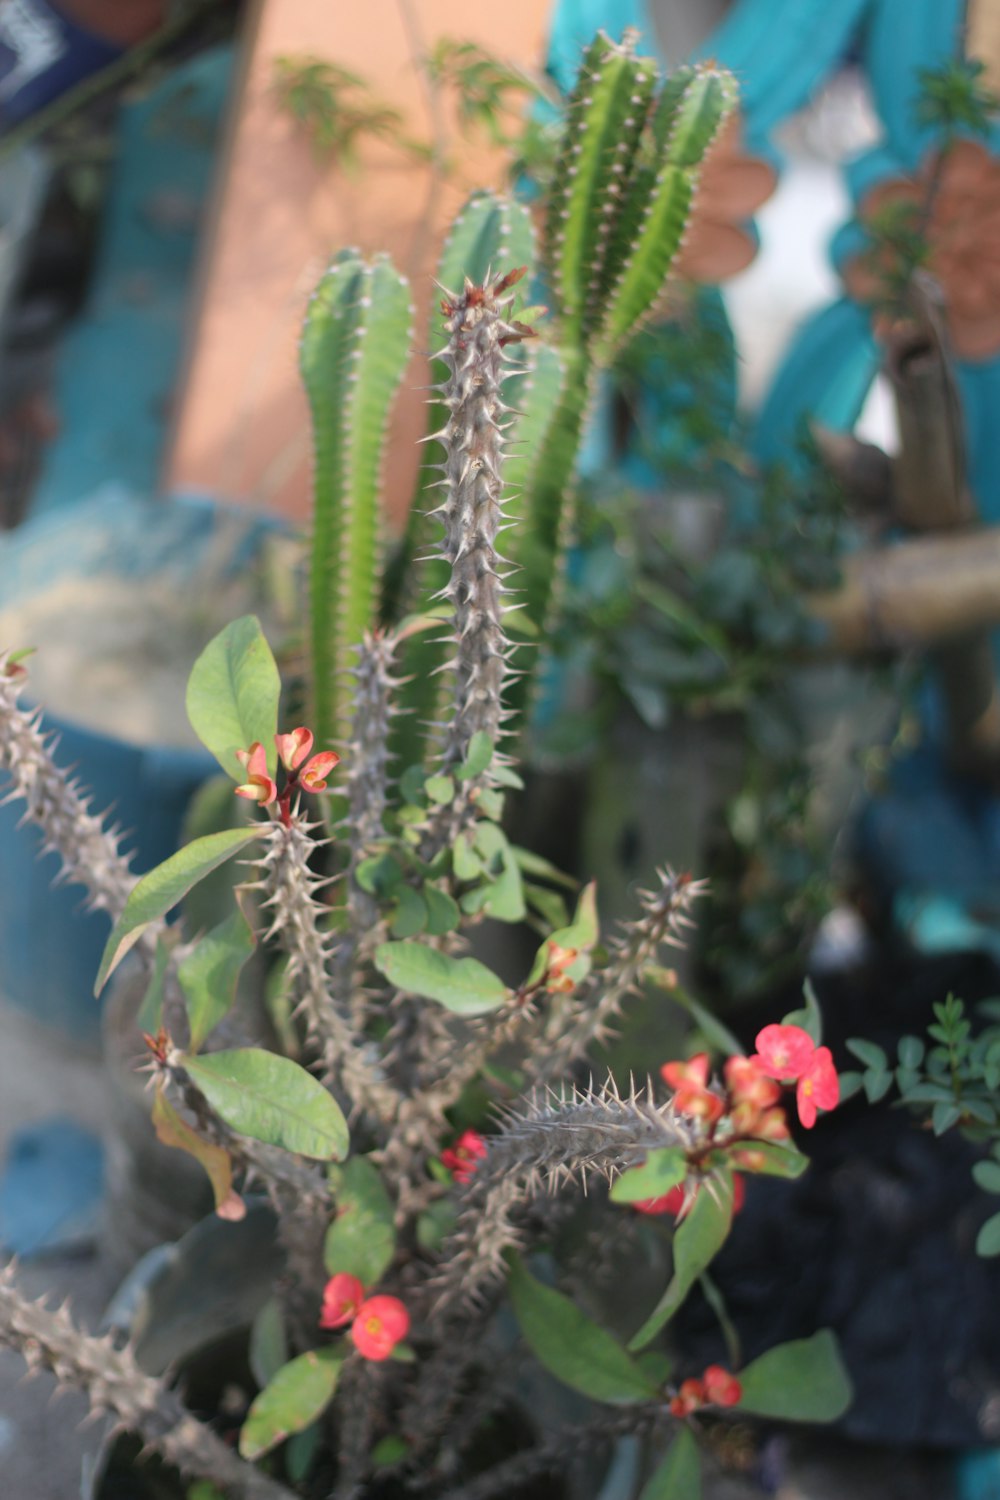 a potted plant with red flowers and green leaves